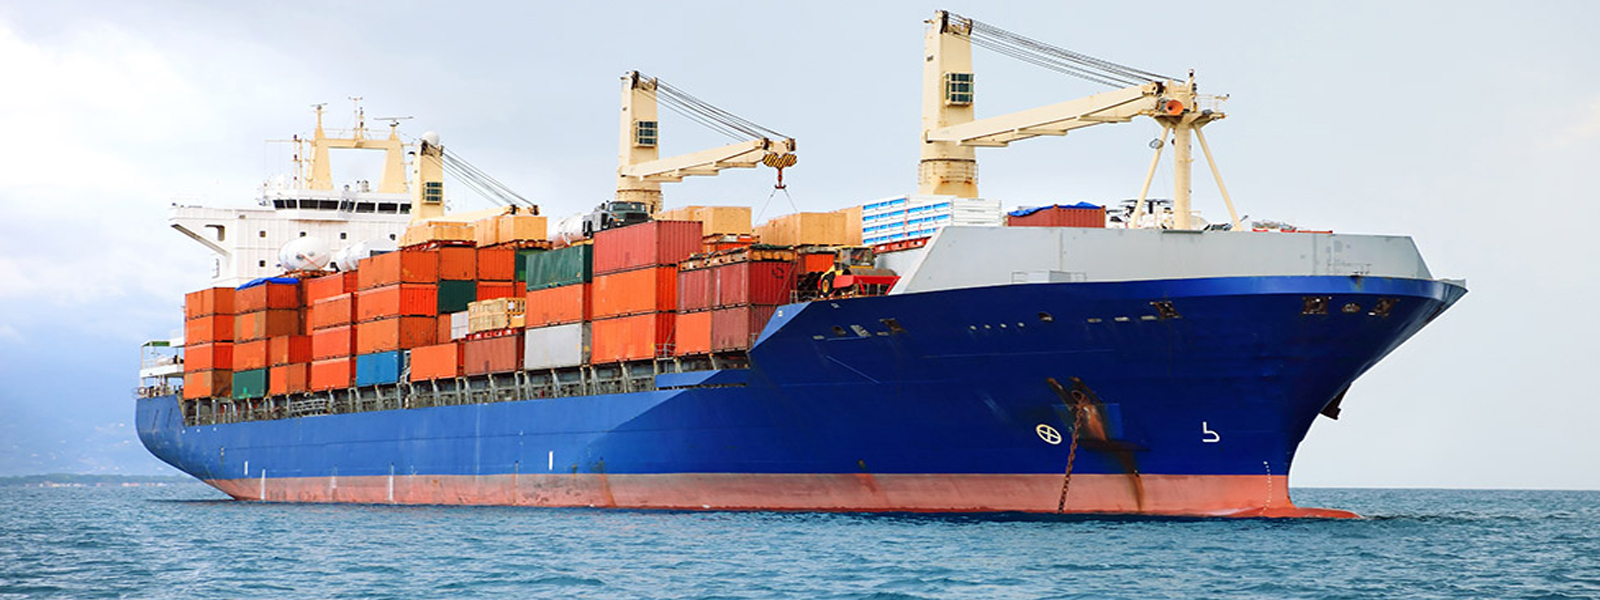 Sea Freight Forwarding Market Report Opportunities, and Forecast By 2033